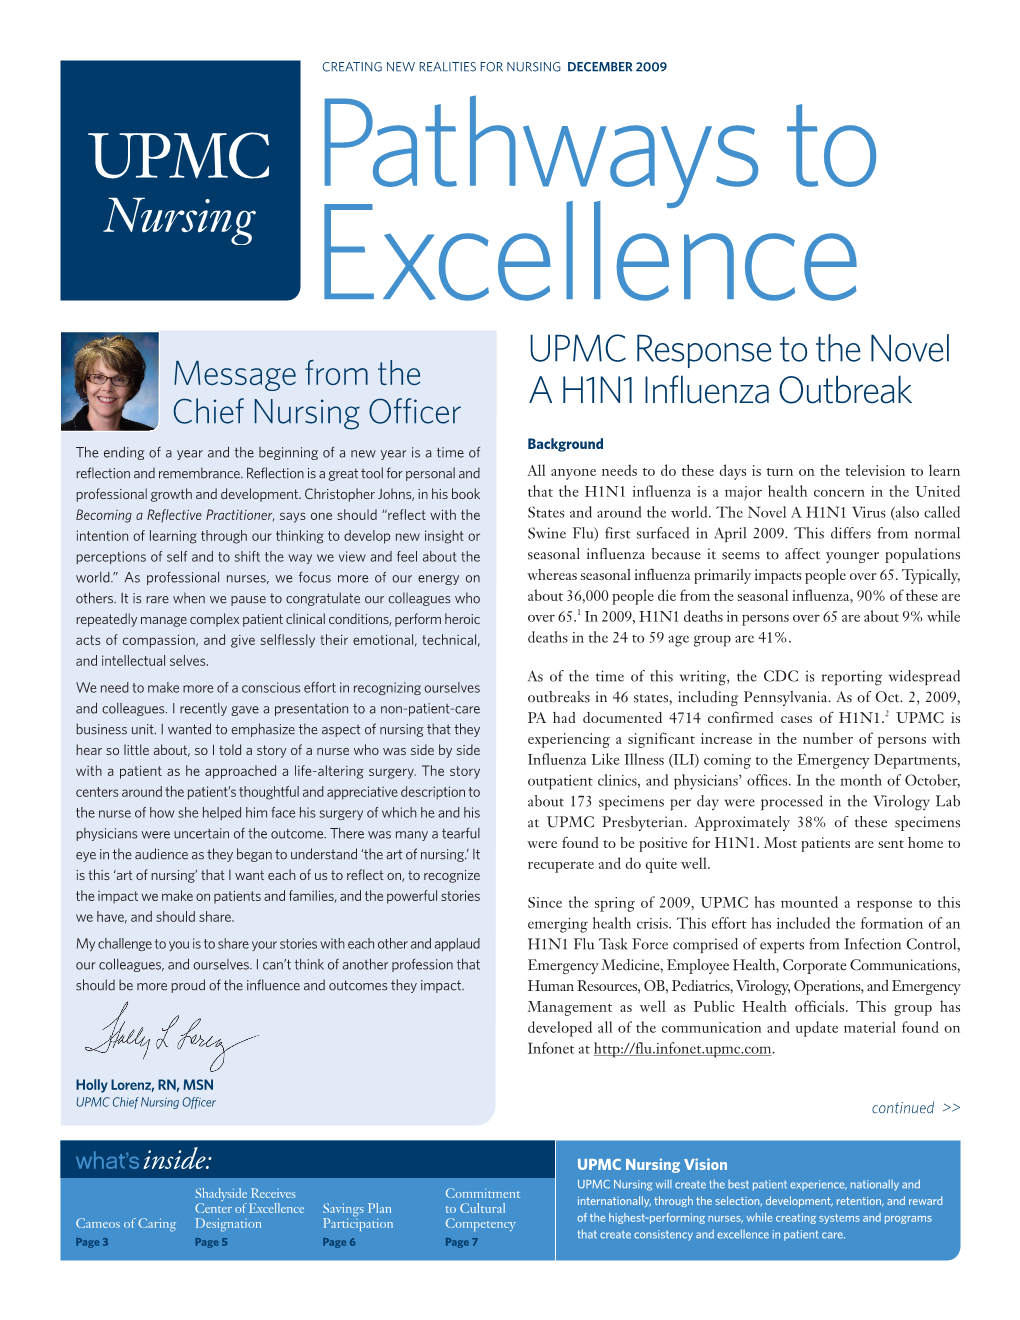 UPMC Response to the Novel a H1N1 Influenza Outbreak